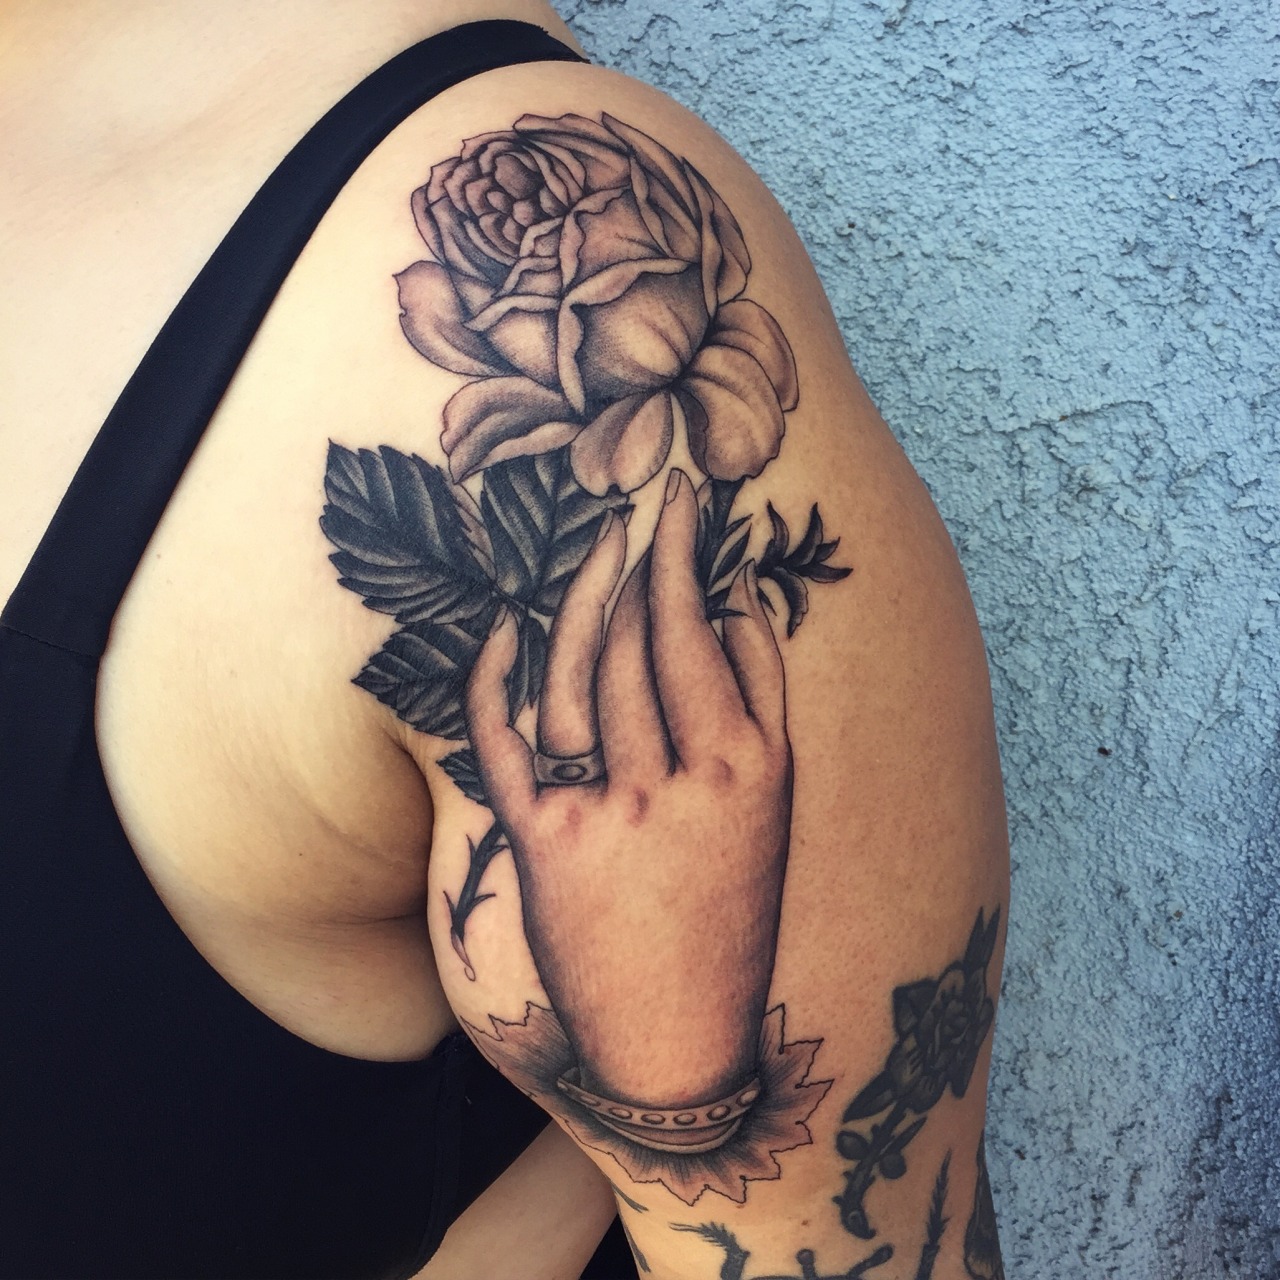 Micky Manning Hand with rose tattoo.jpg